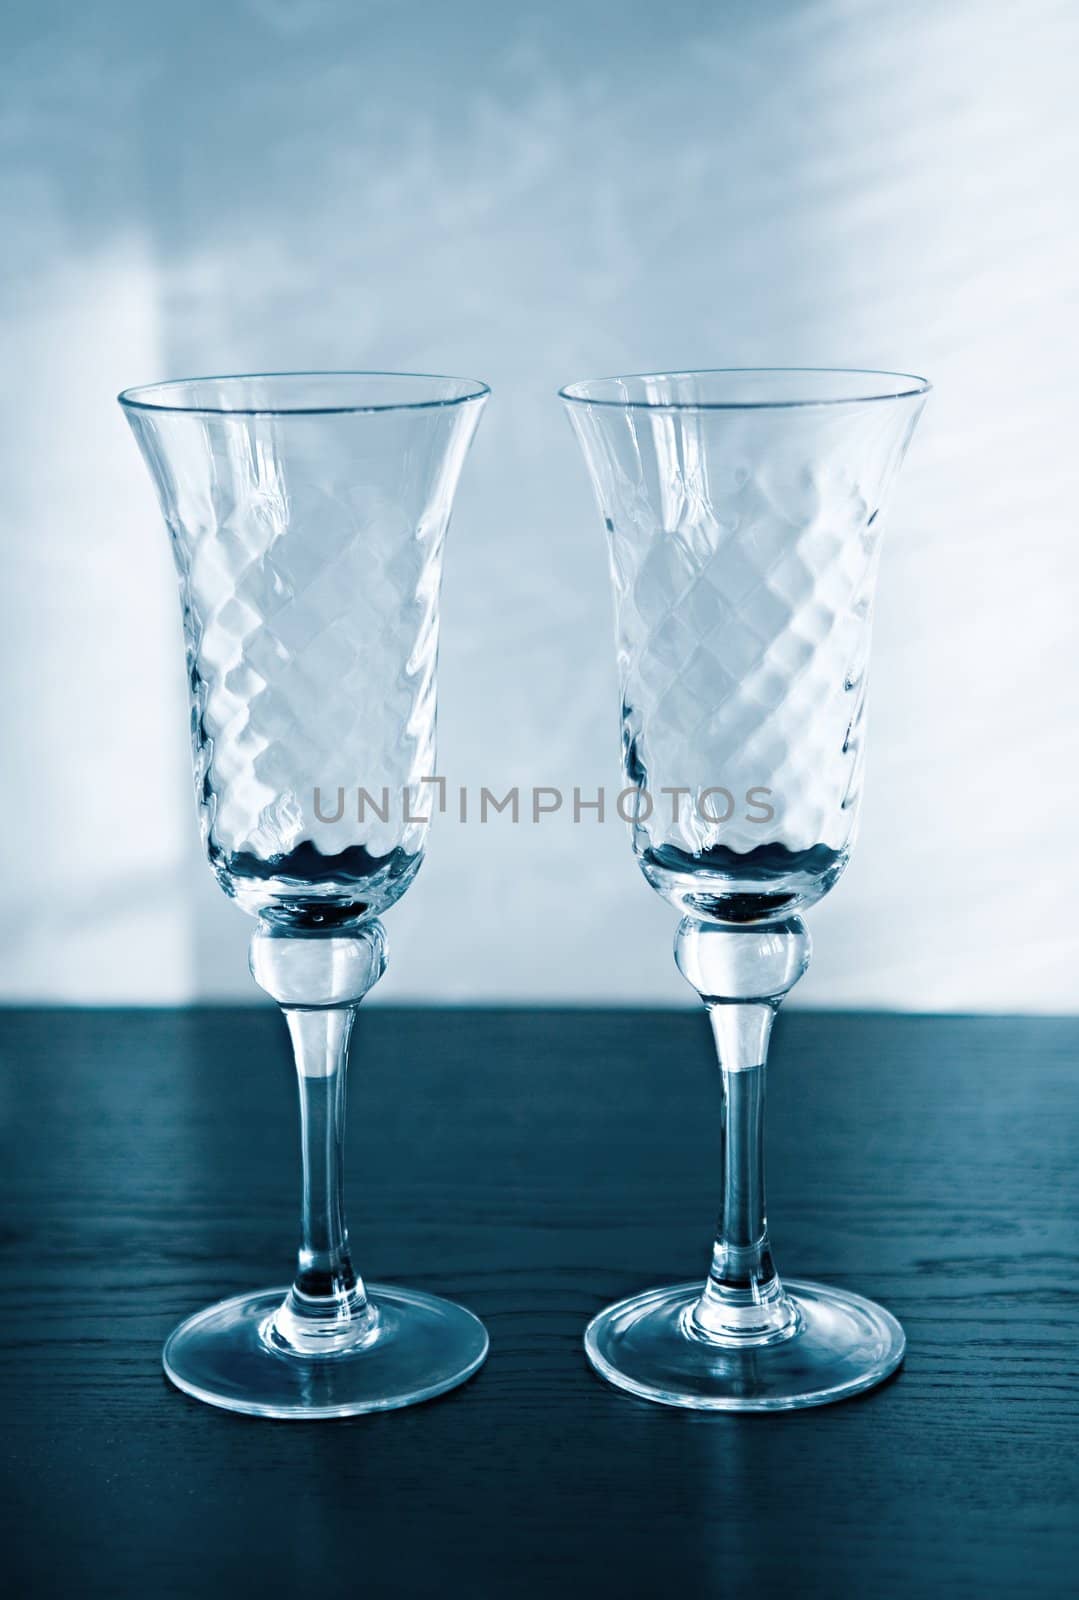 Two empty glasses for a sparkling wine stand on a black surface
